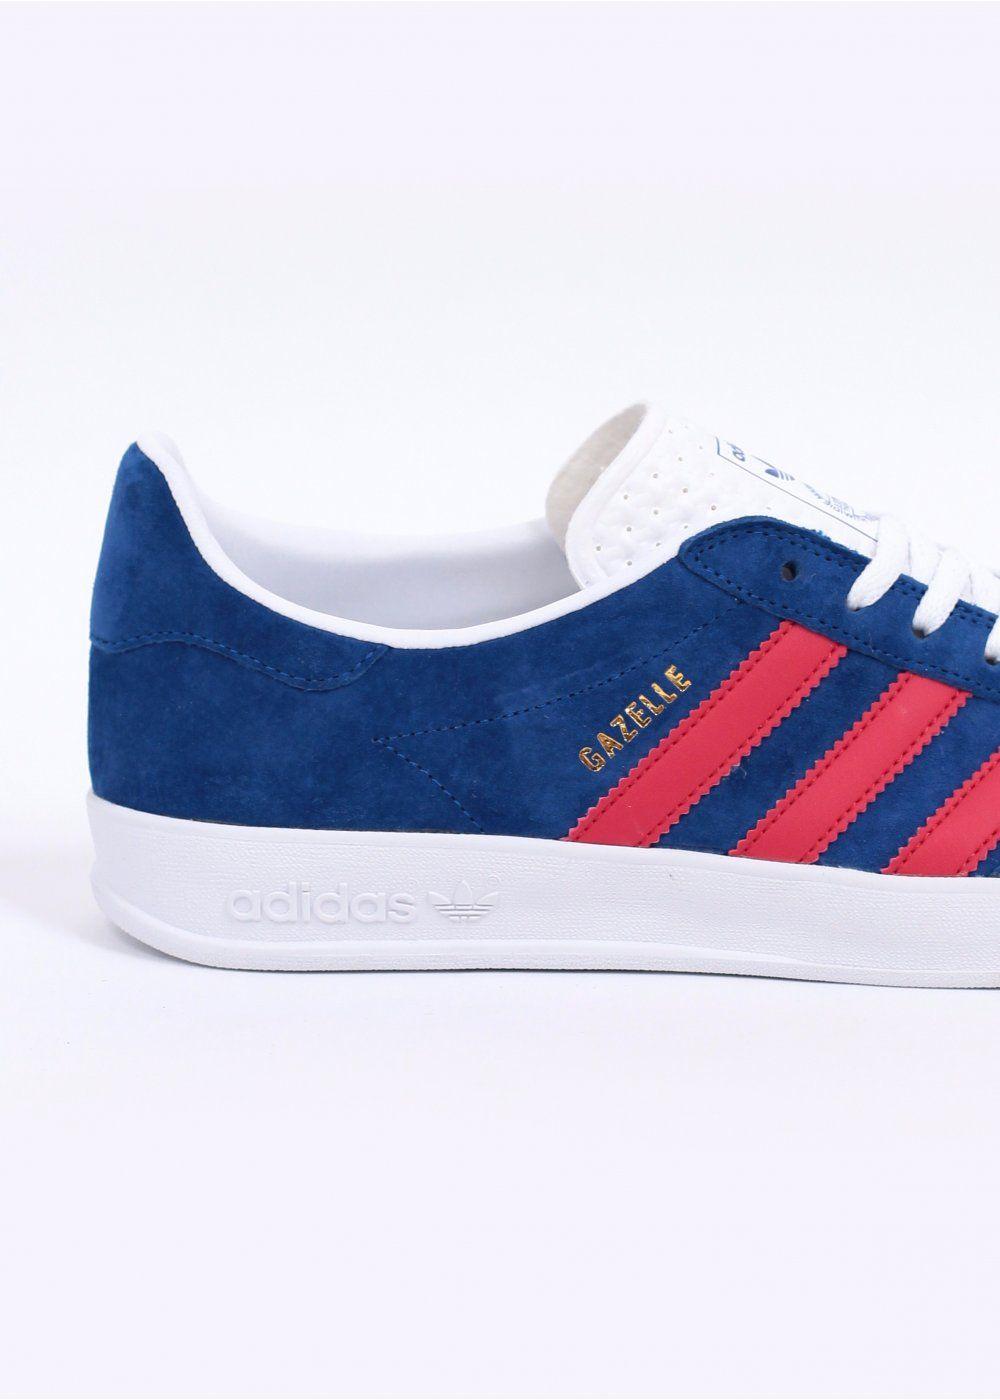 Blue and Red Adidas Logo - adidas Originals Gazelle Indoor Trainers Blue / Red